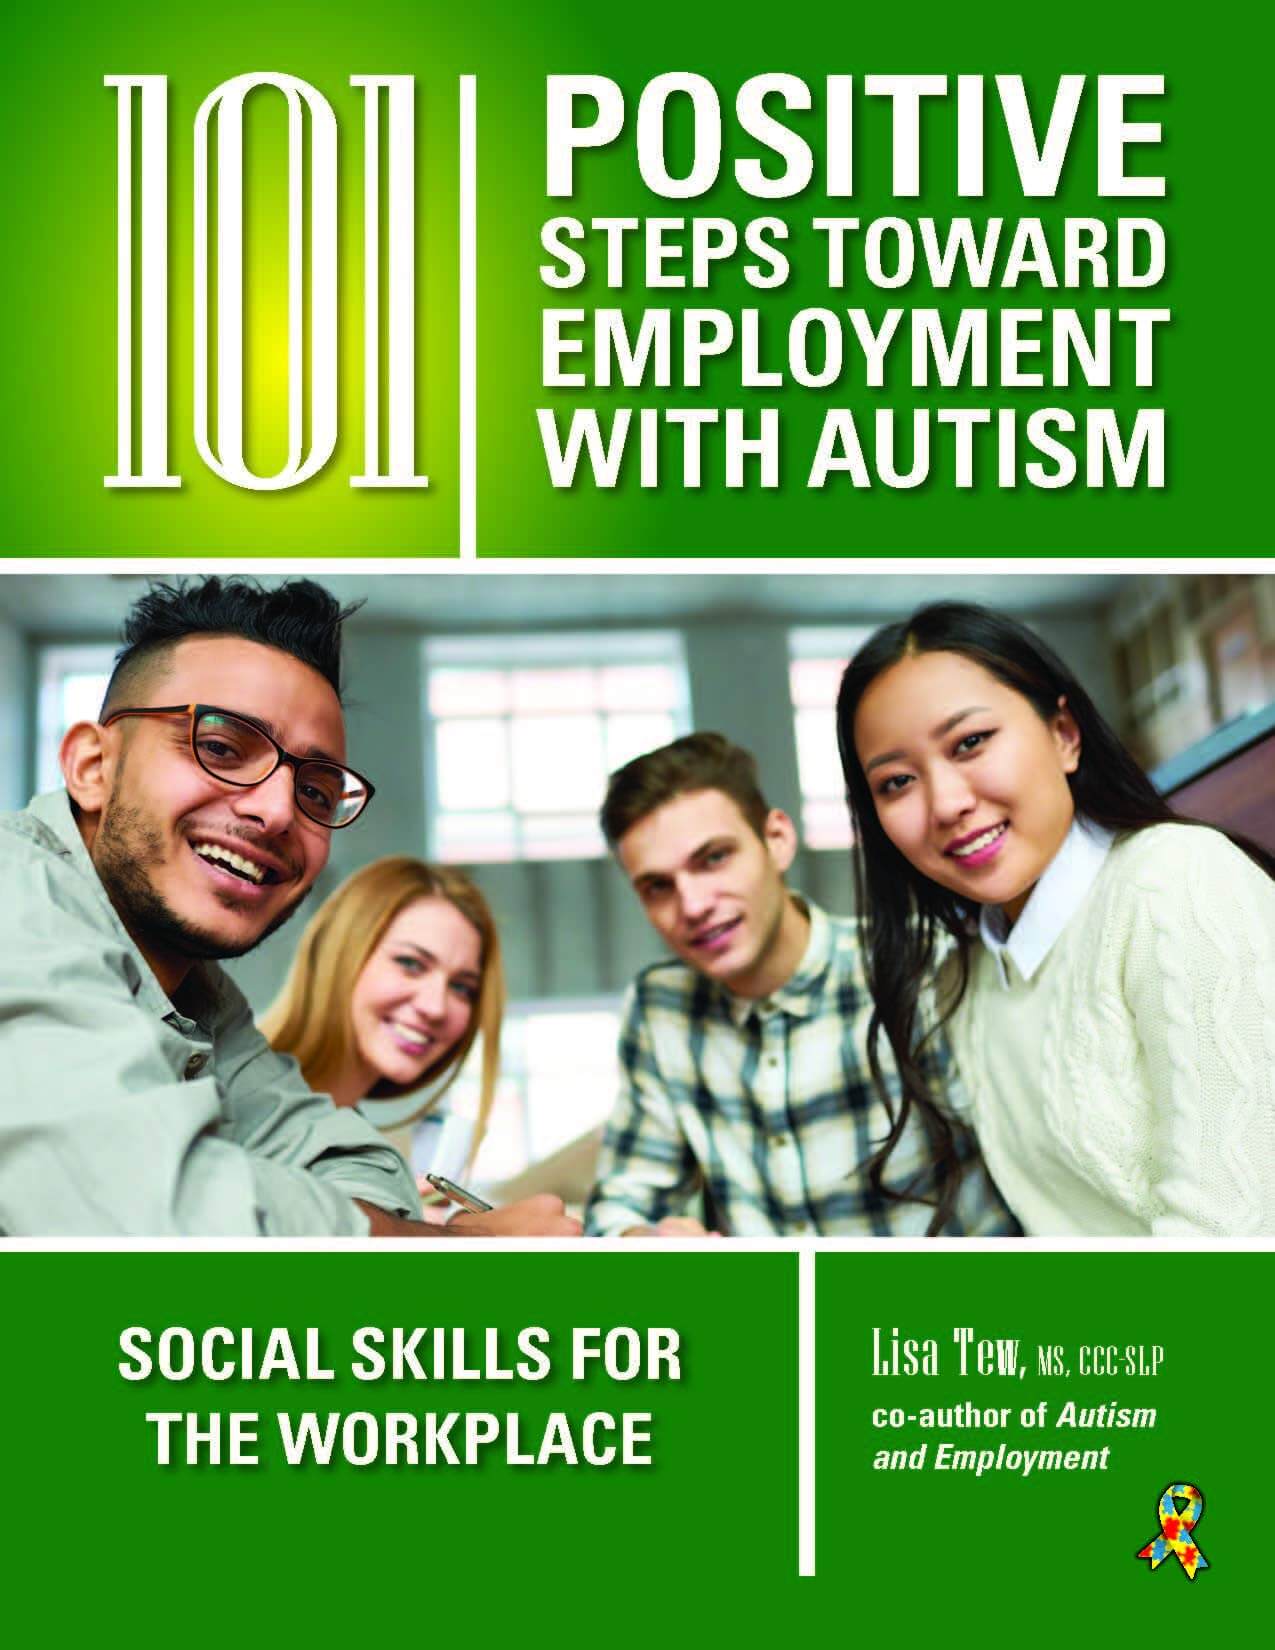 101 Positive Steps Toward Employment with Autism: Social Skills for the Workplace